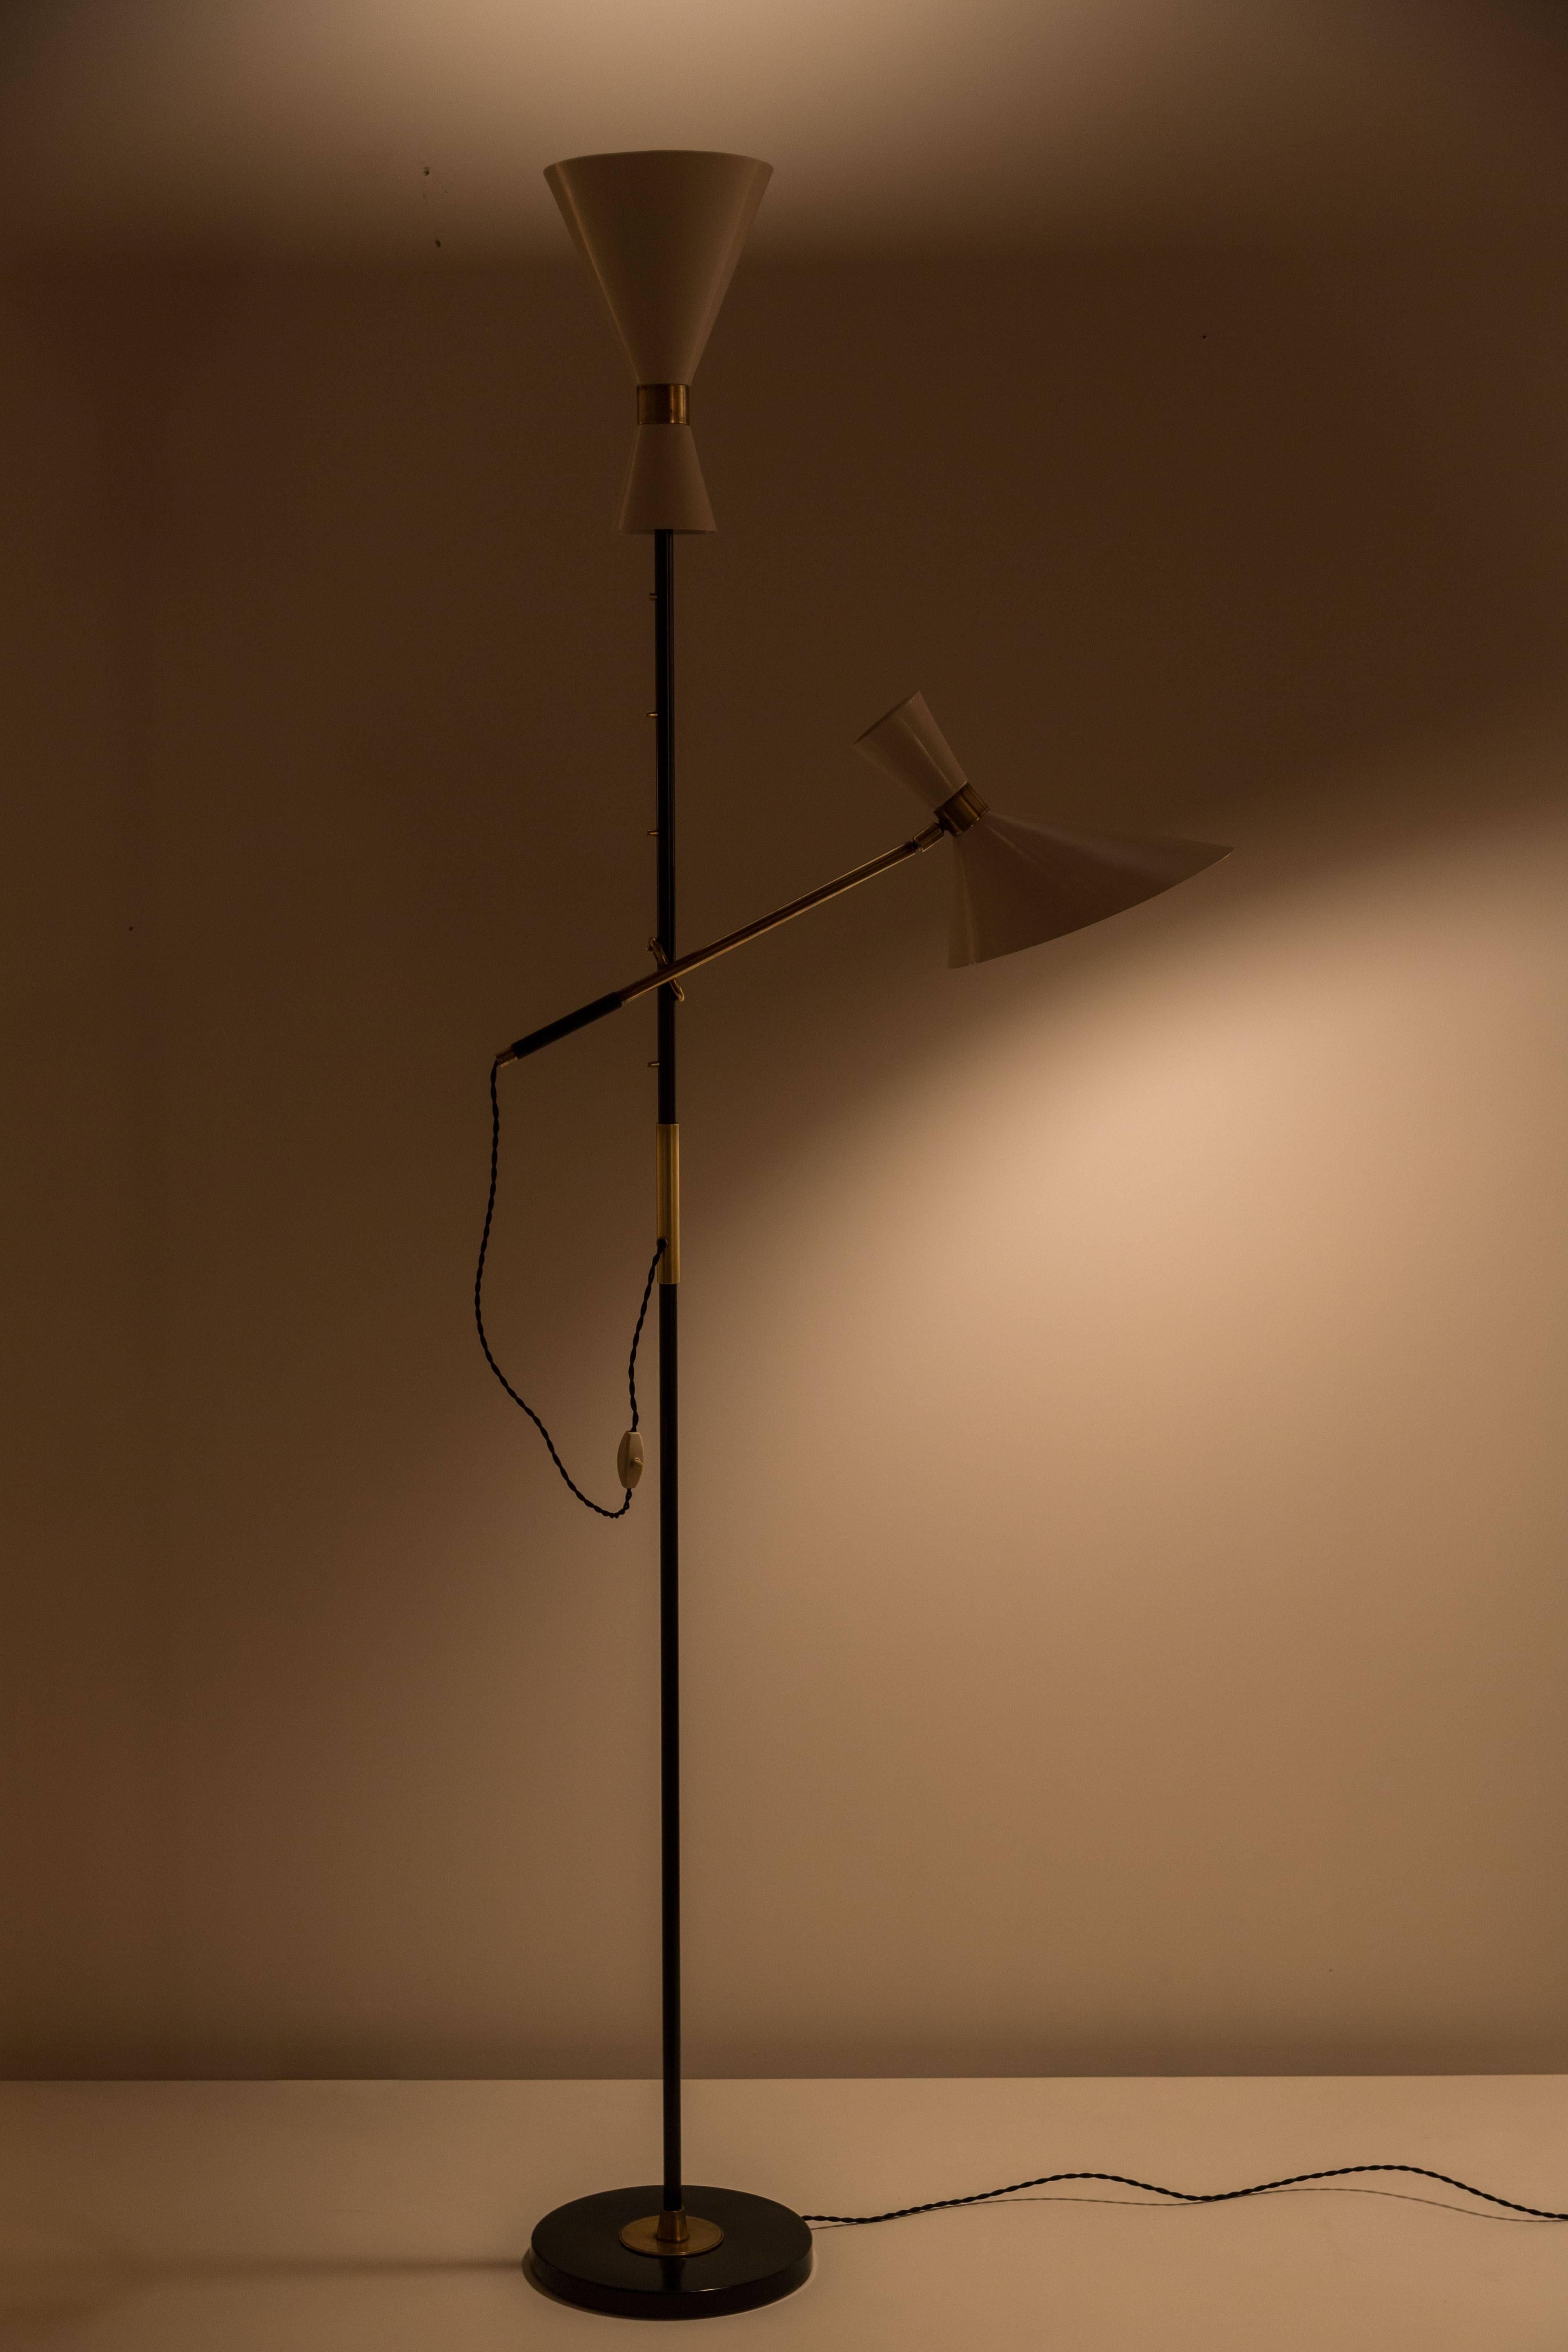 An Austrian Floor lamp designed by Kalmar Lighting 
Rewired with original switches in tact and shades have been 
restored to their original color.